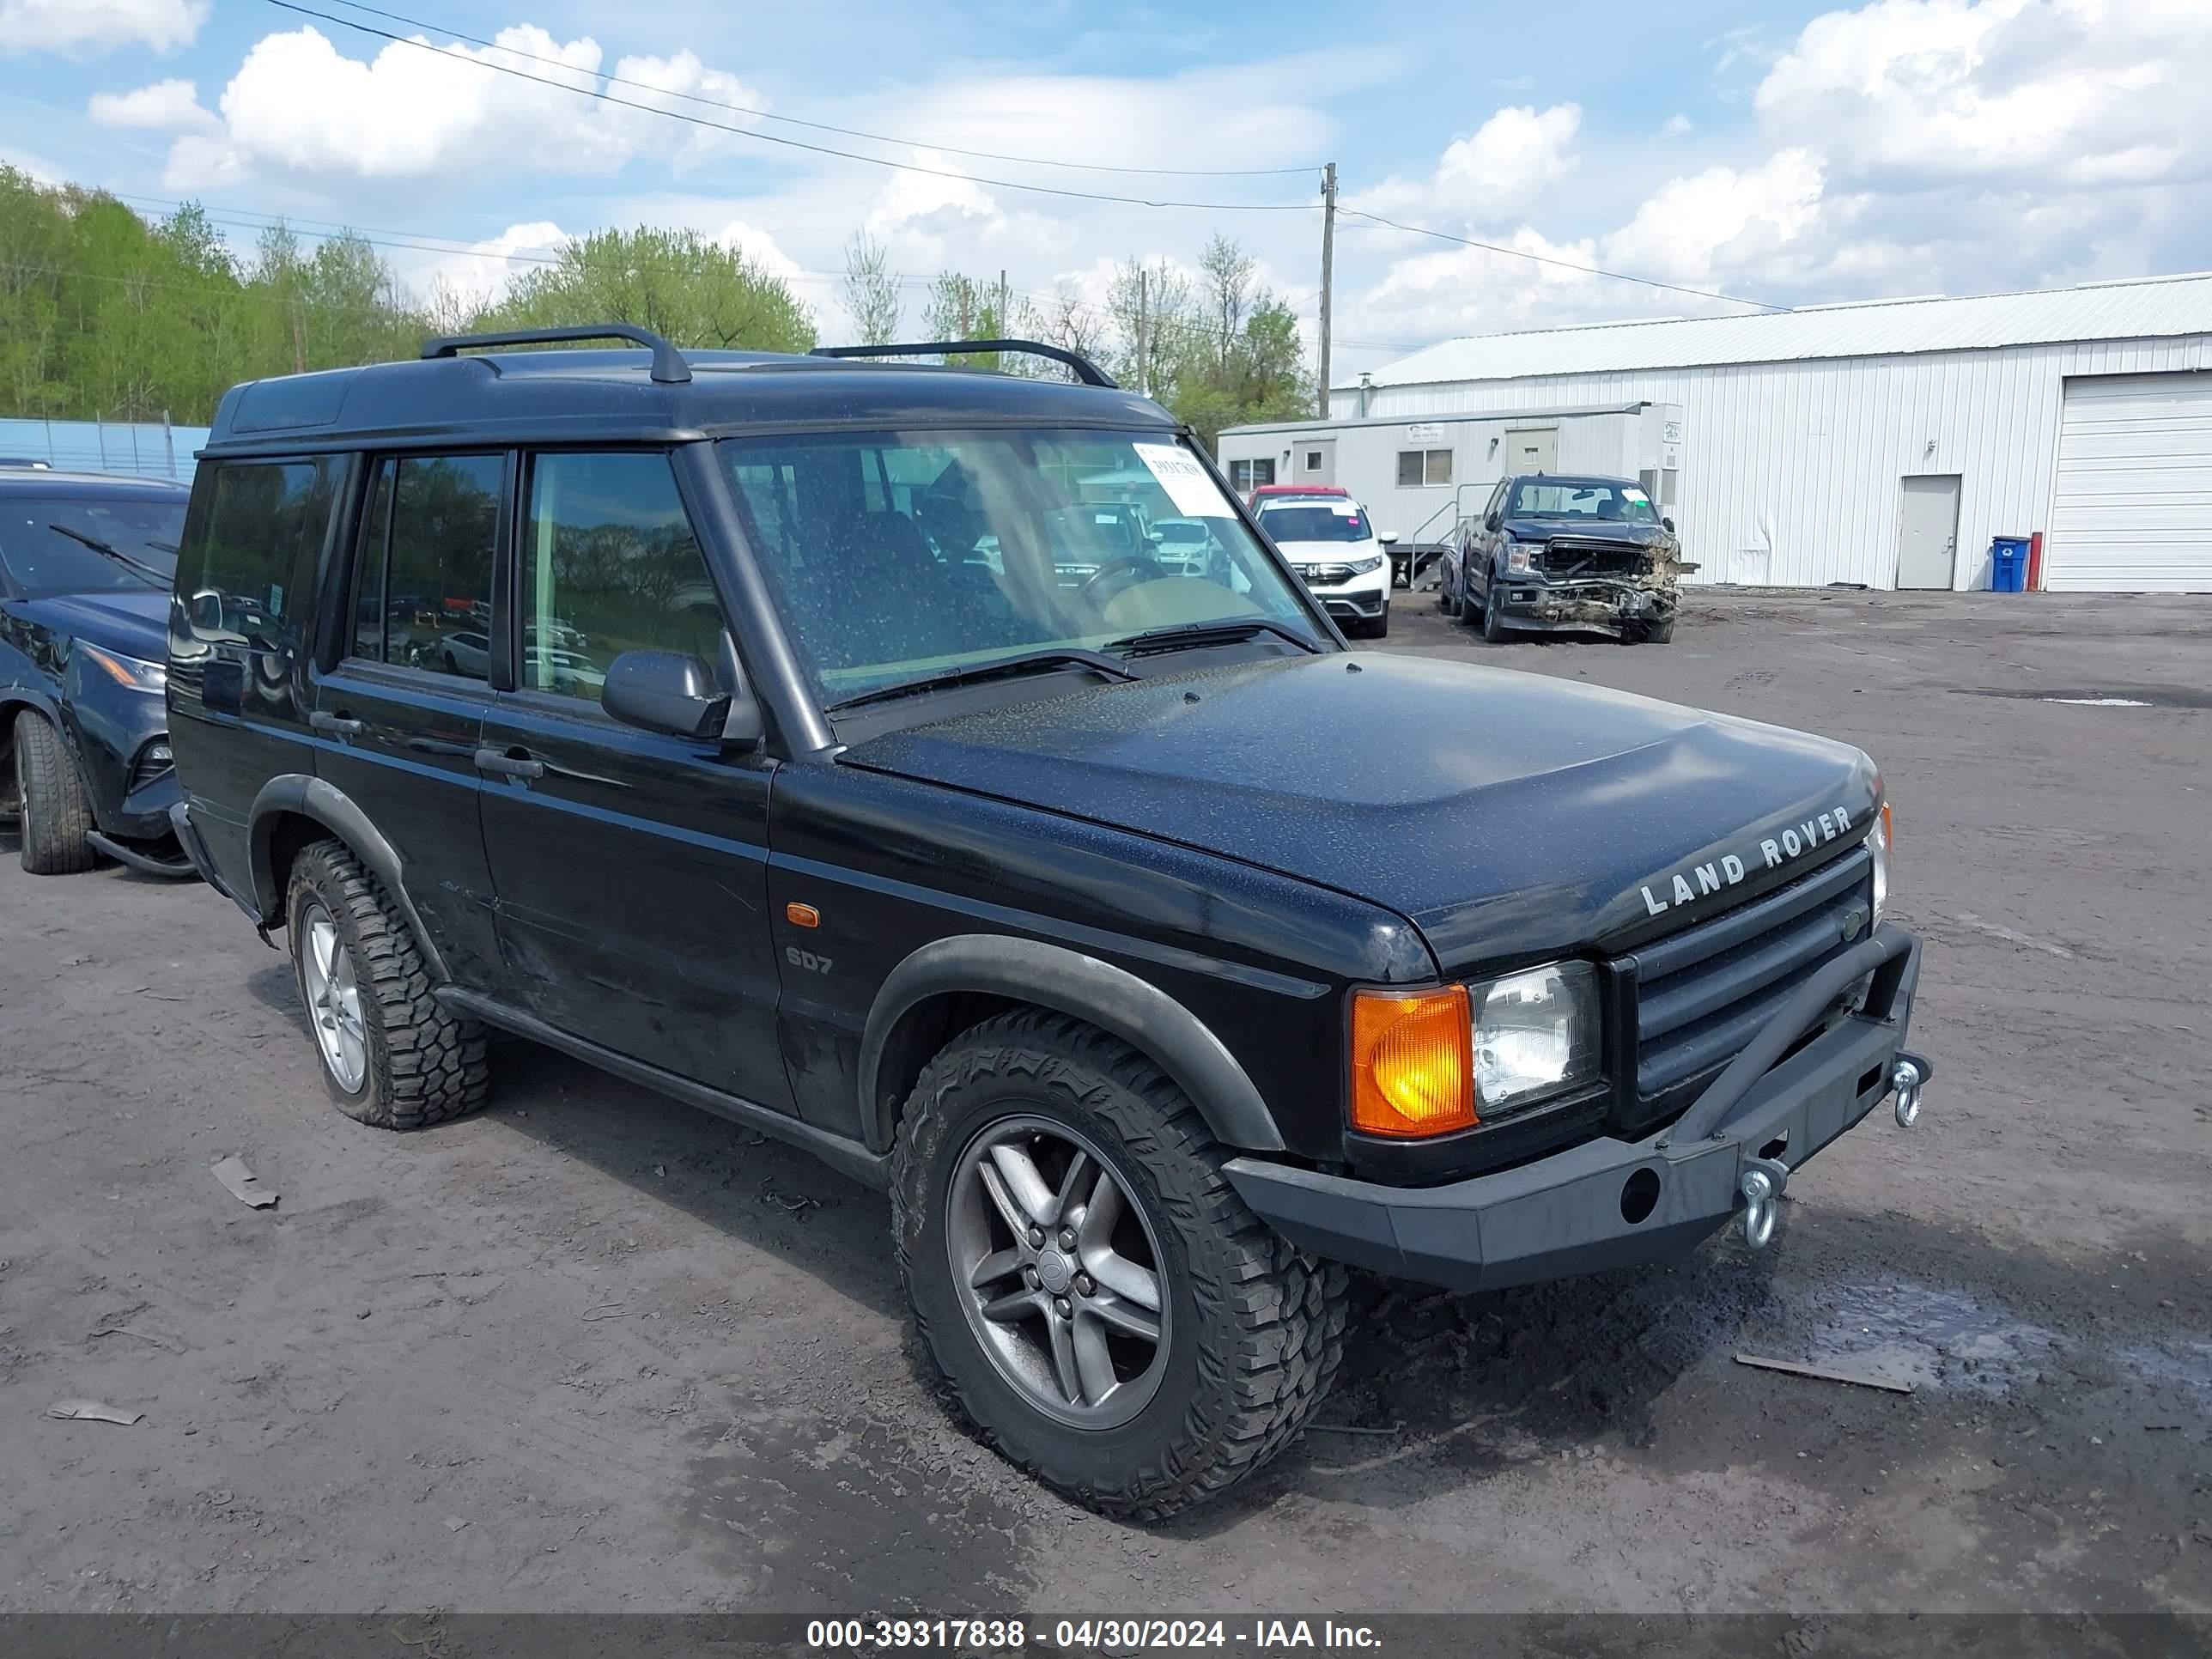 land rover discovery 2002 saltk12442a760547